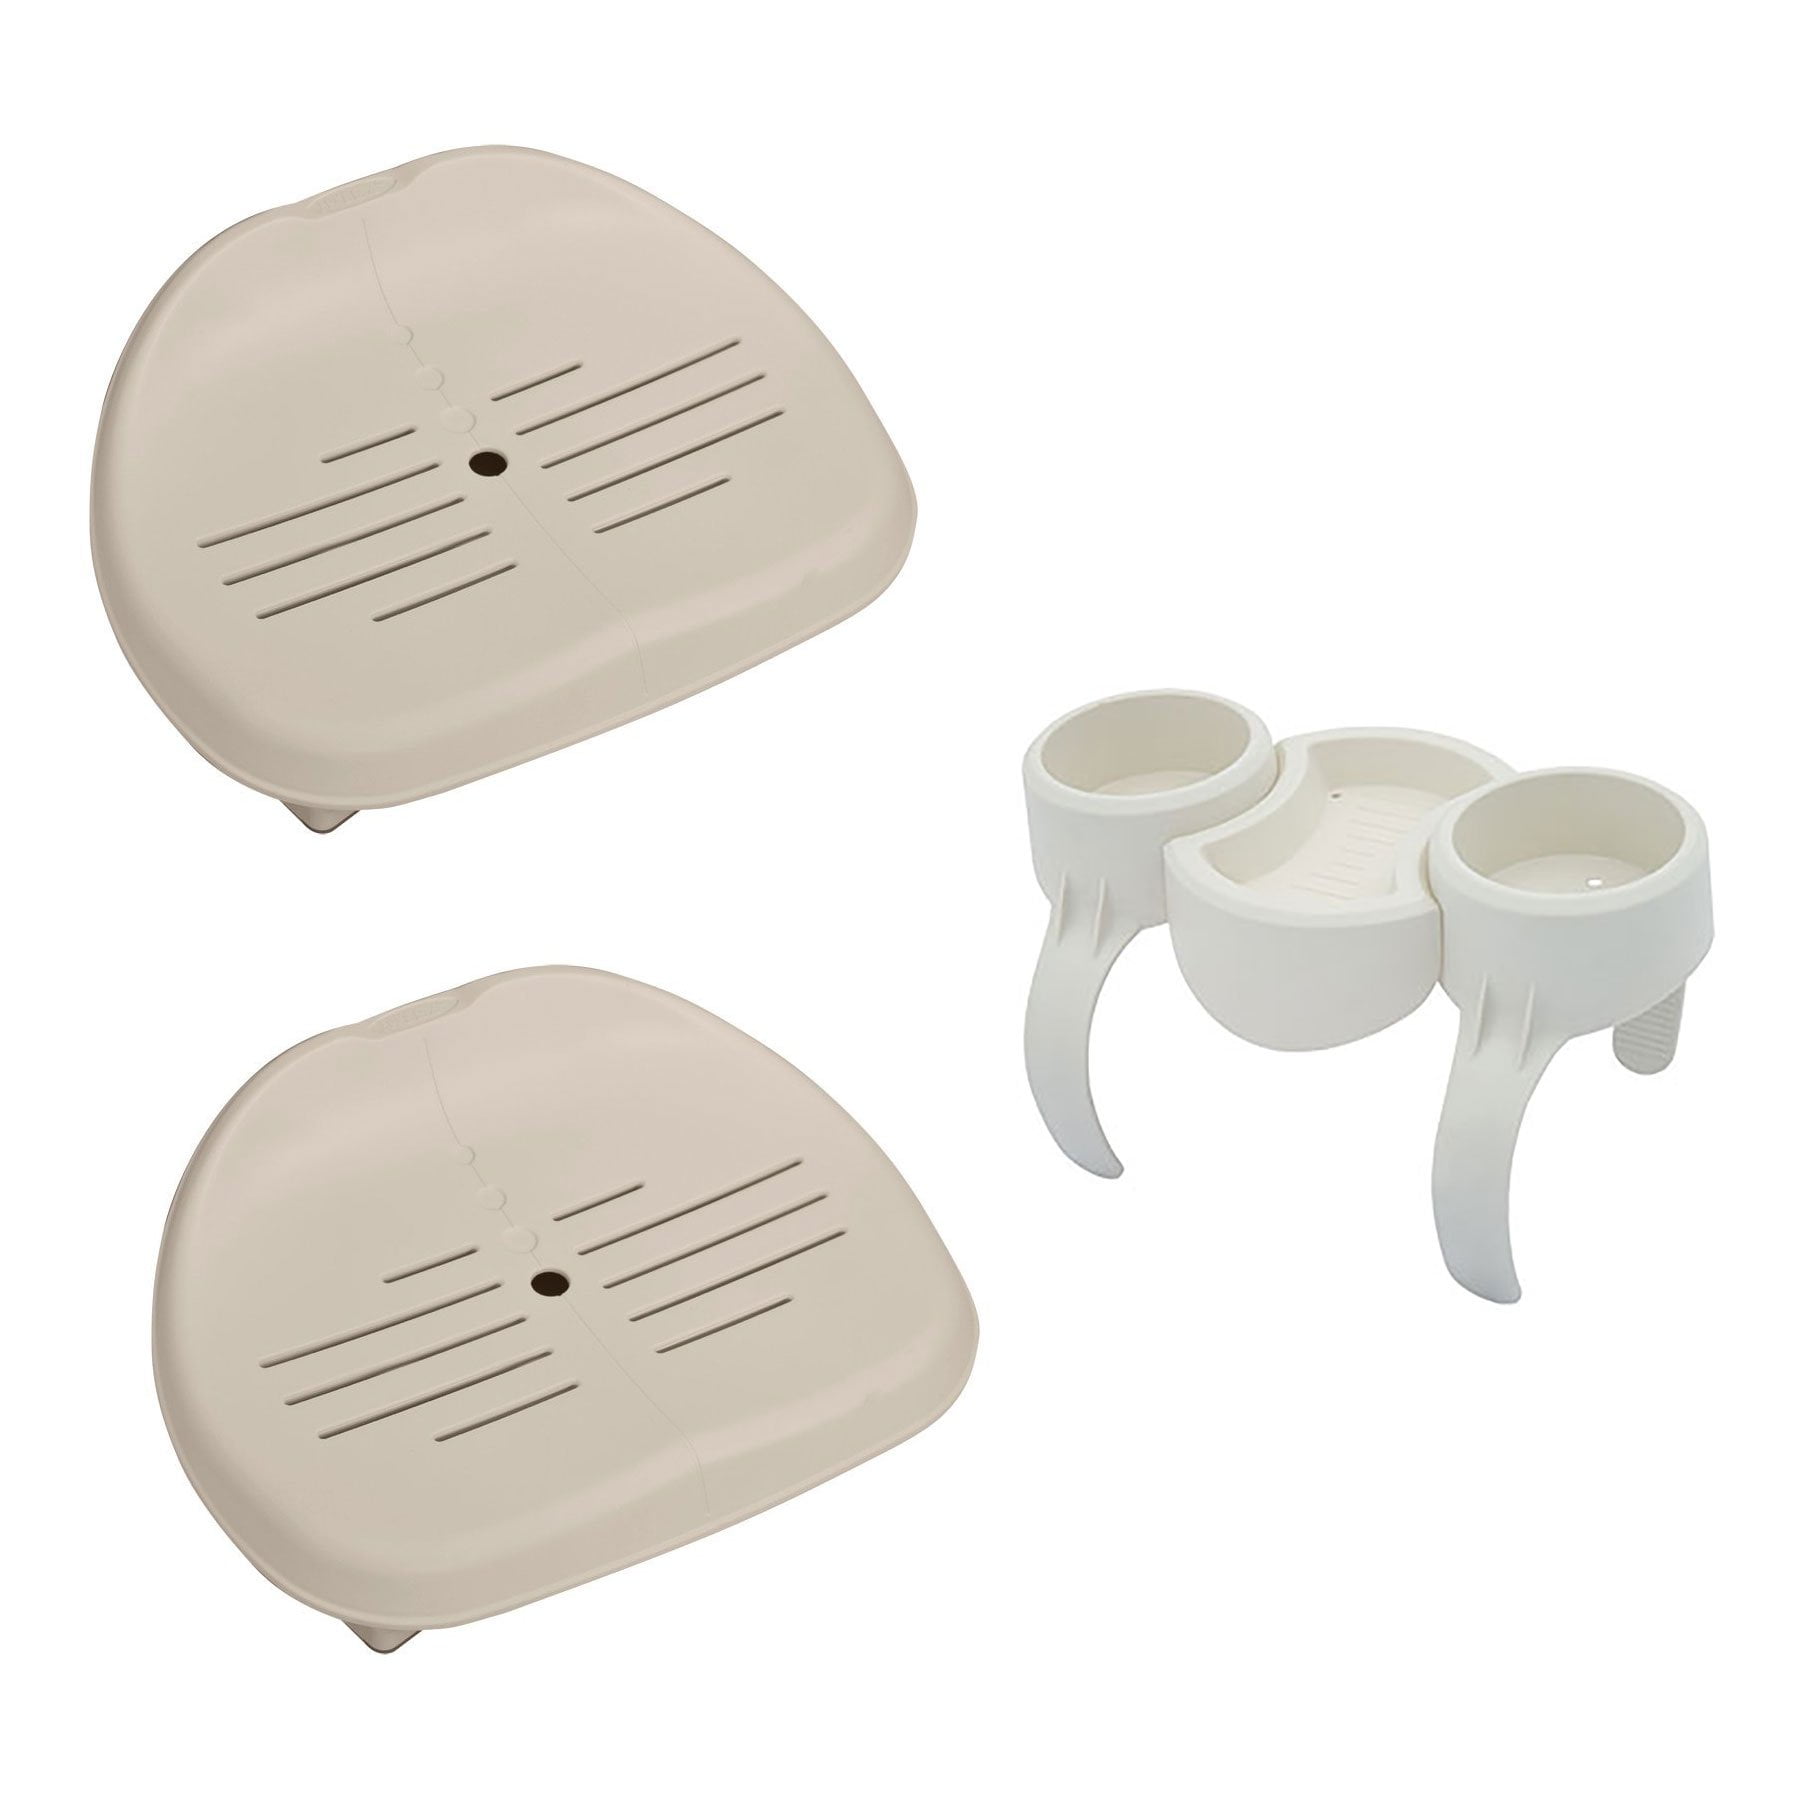 Intex Inflatable Pure Spa Hot Tub Removable Seat 2 Pack Drink